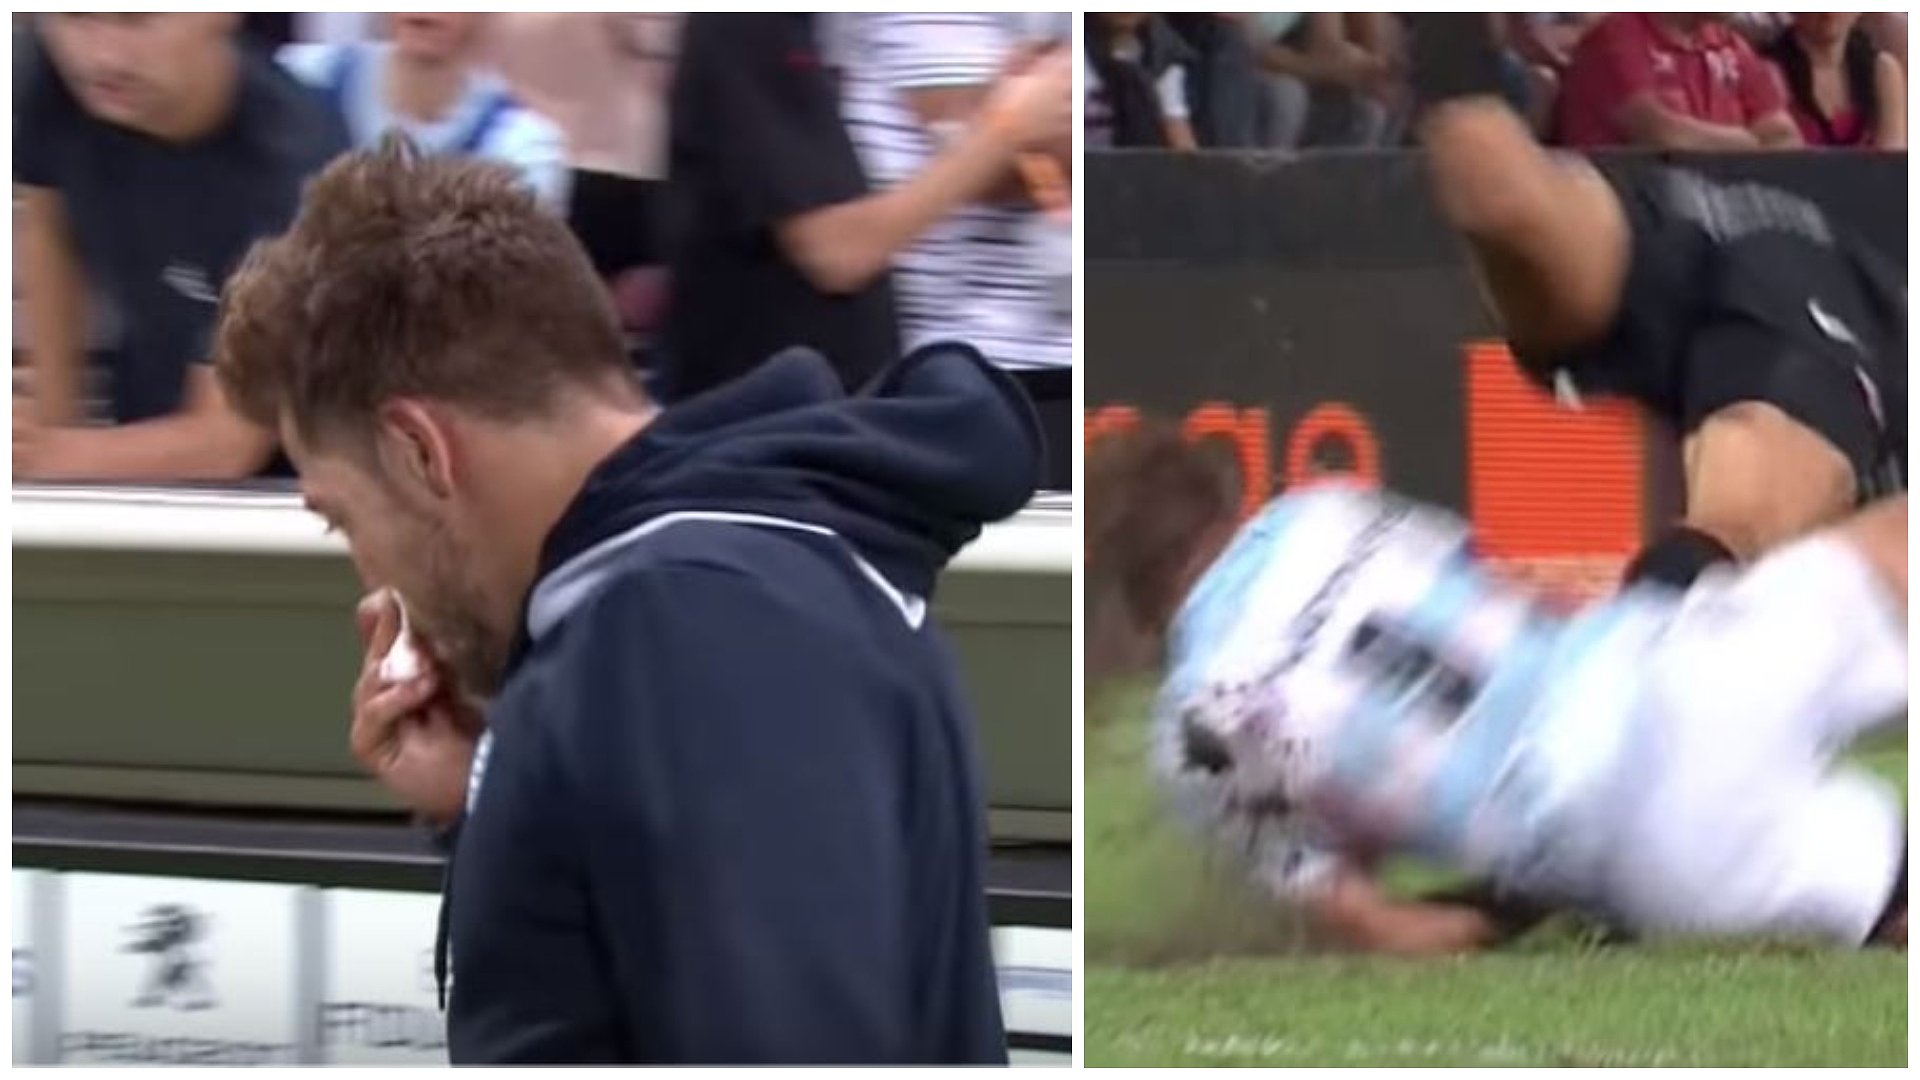 LOOK: Racing scrumhalf left with brutal facial injury after receiving boot to face